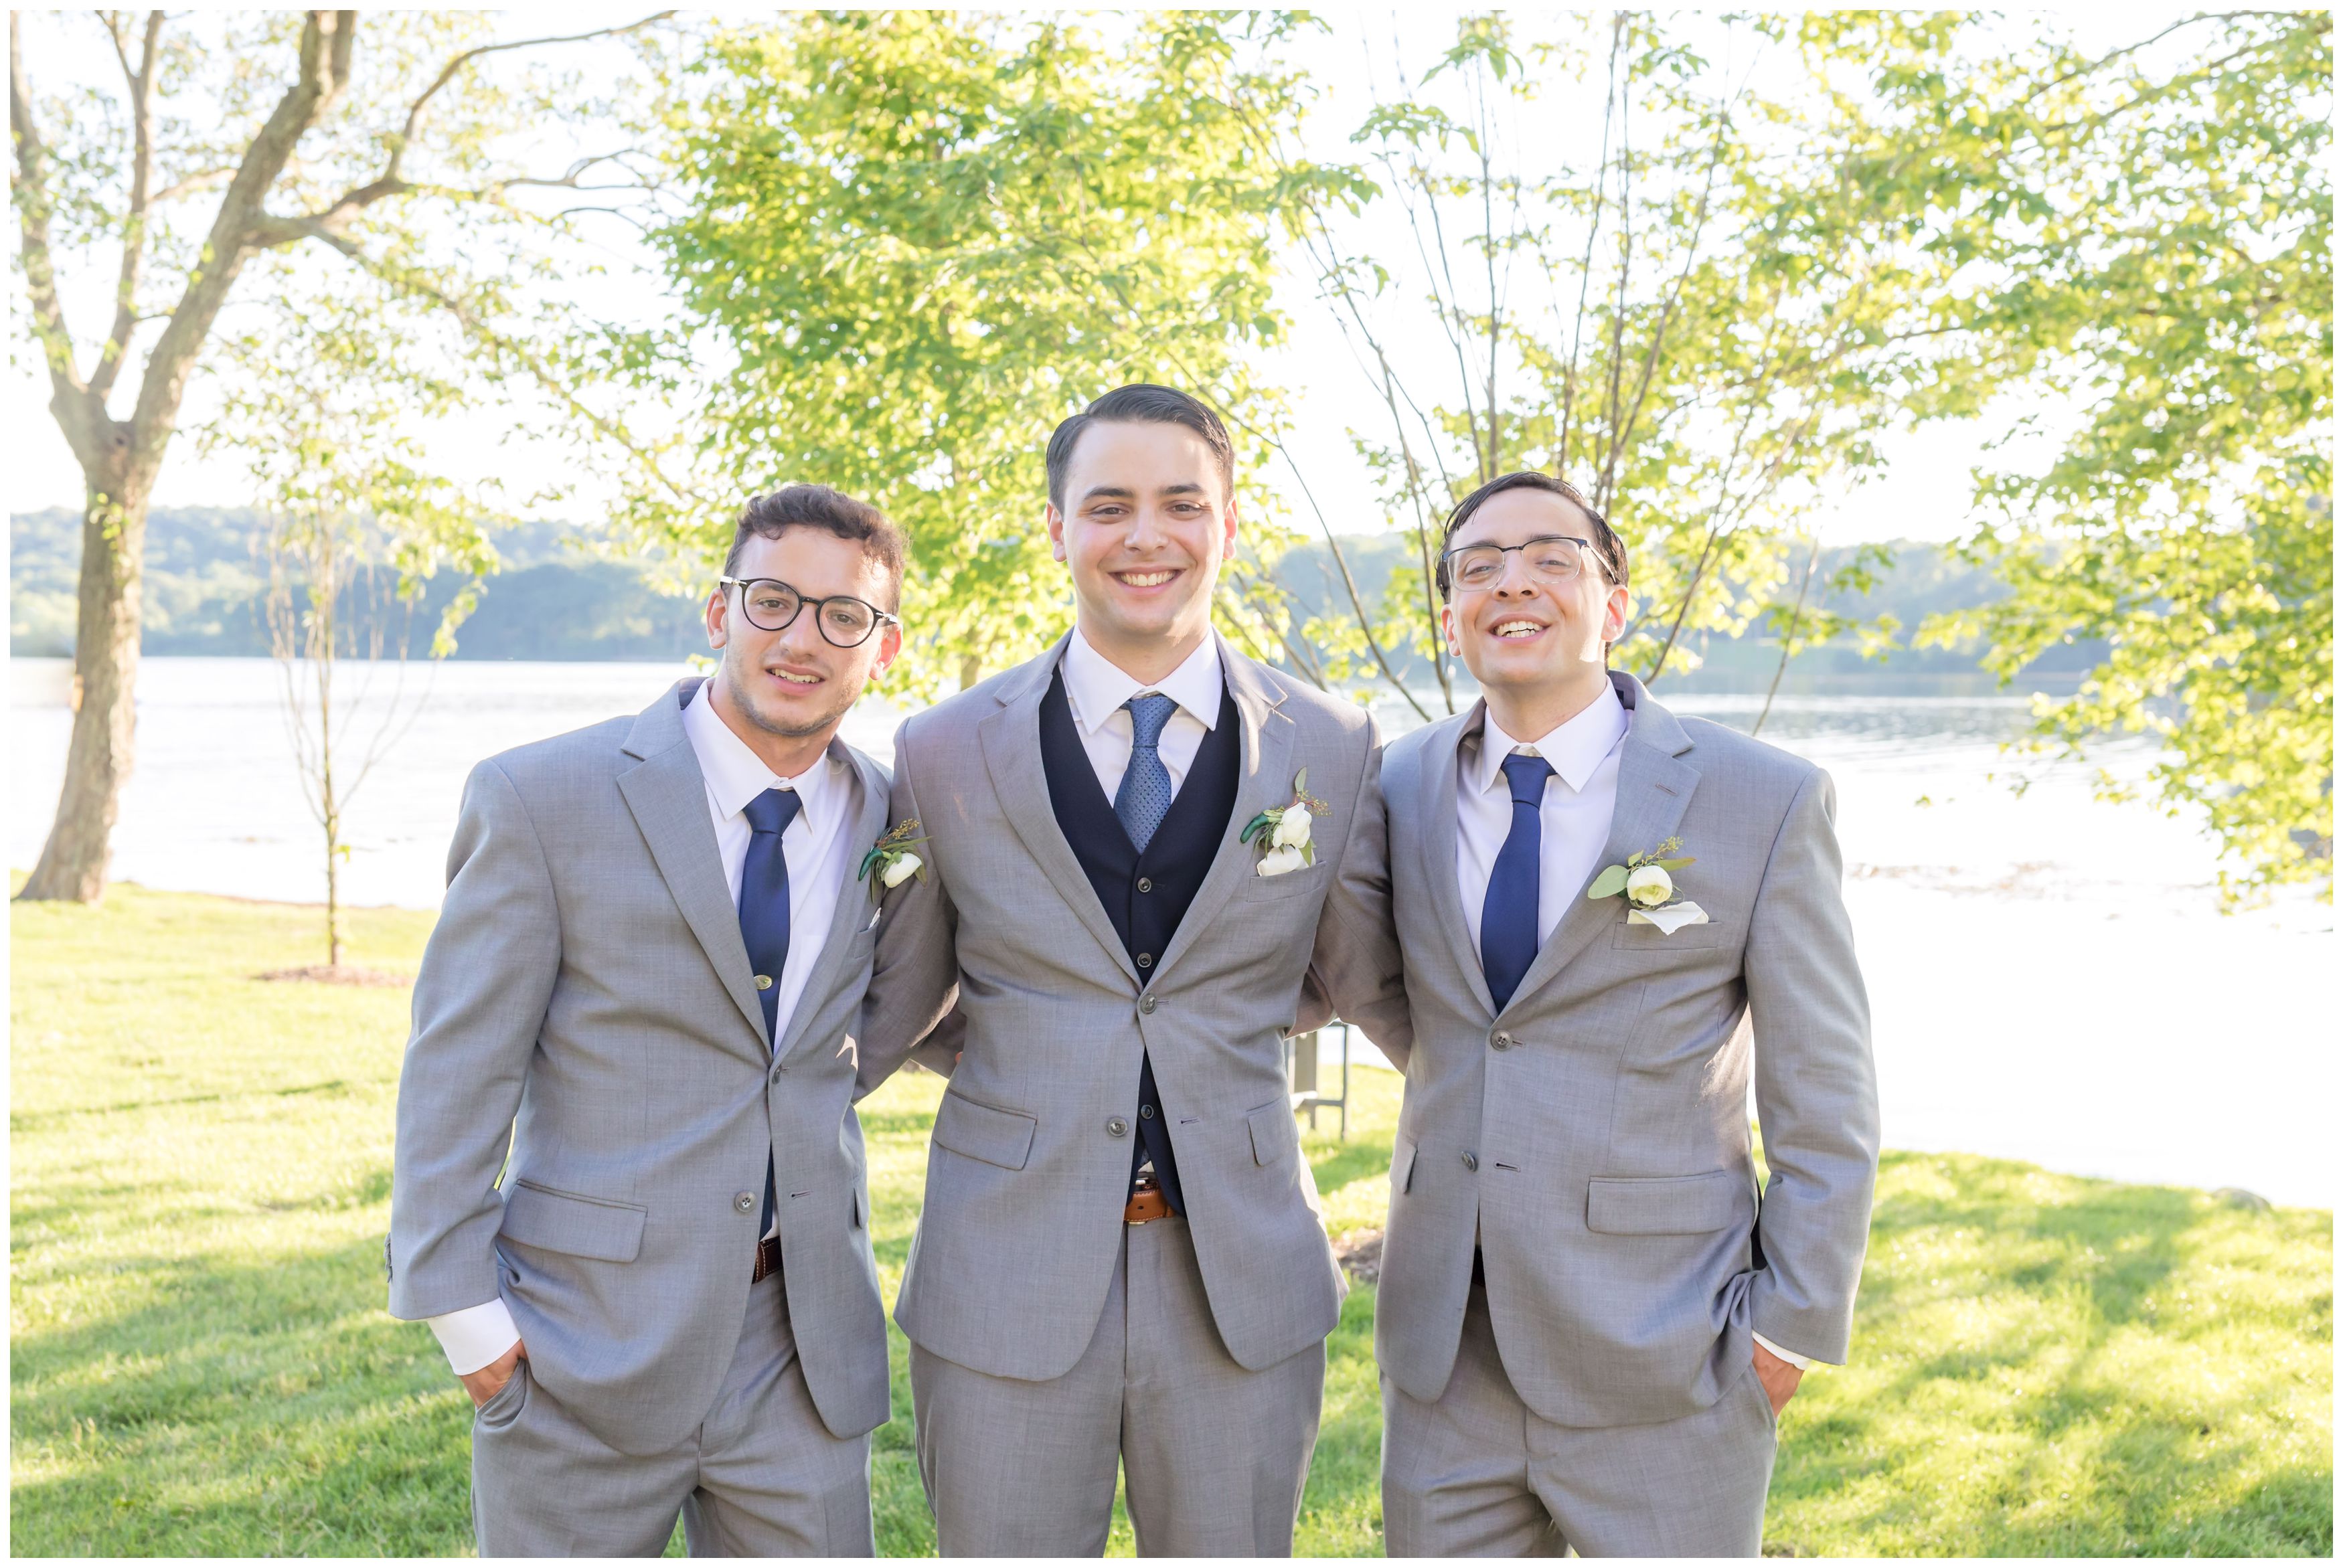 Groom and brothers family wedding photo outdoor lakeside